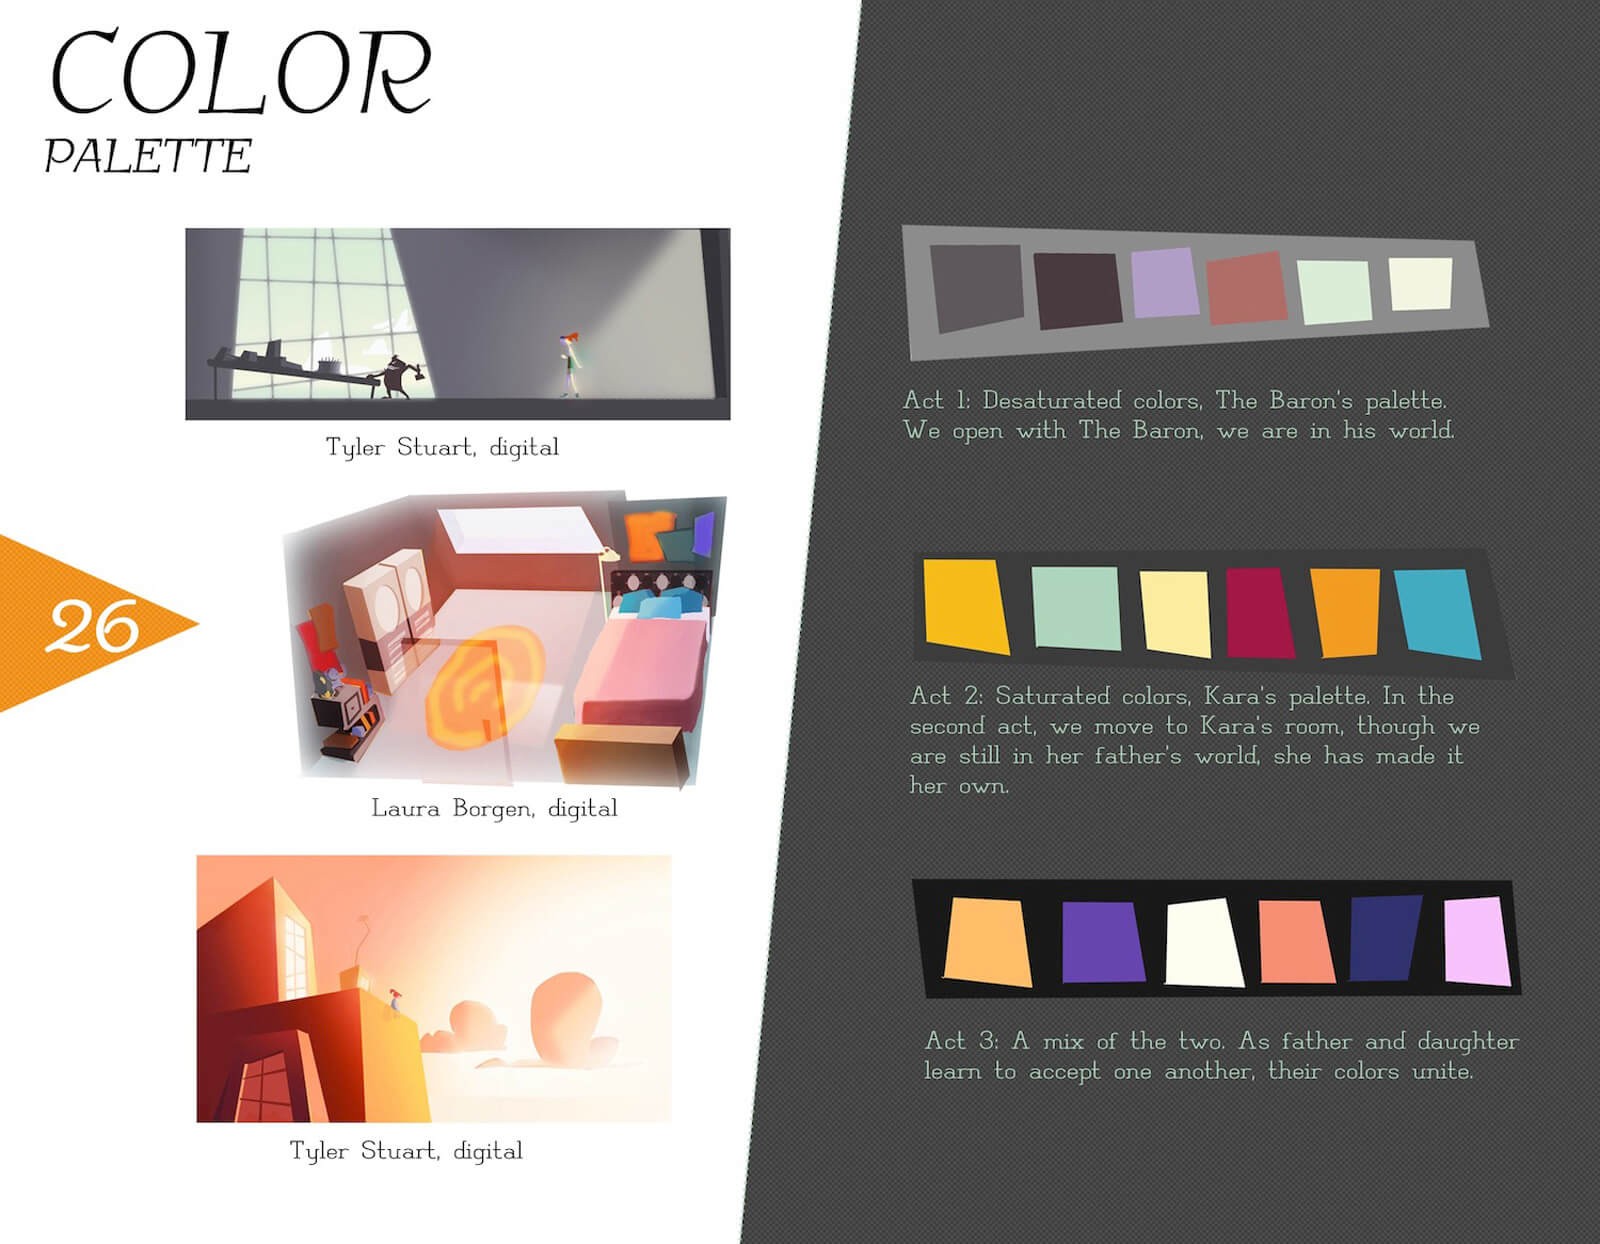 Color palette slide for the film Super Secret, including desaturated and saturated colors from different scenes